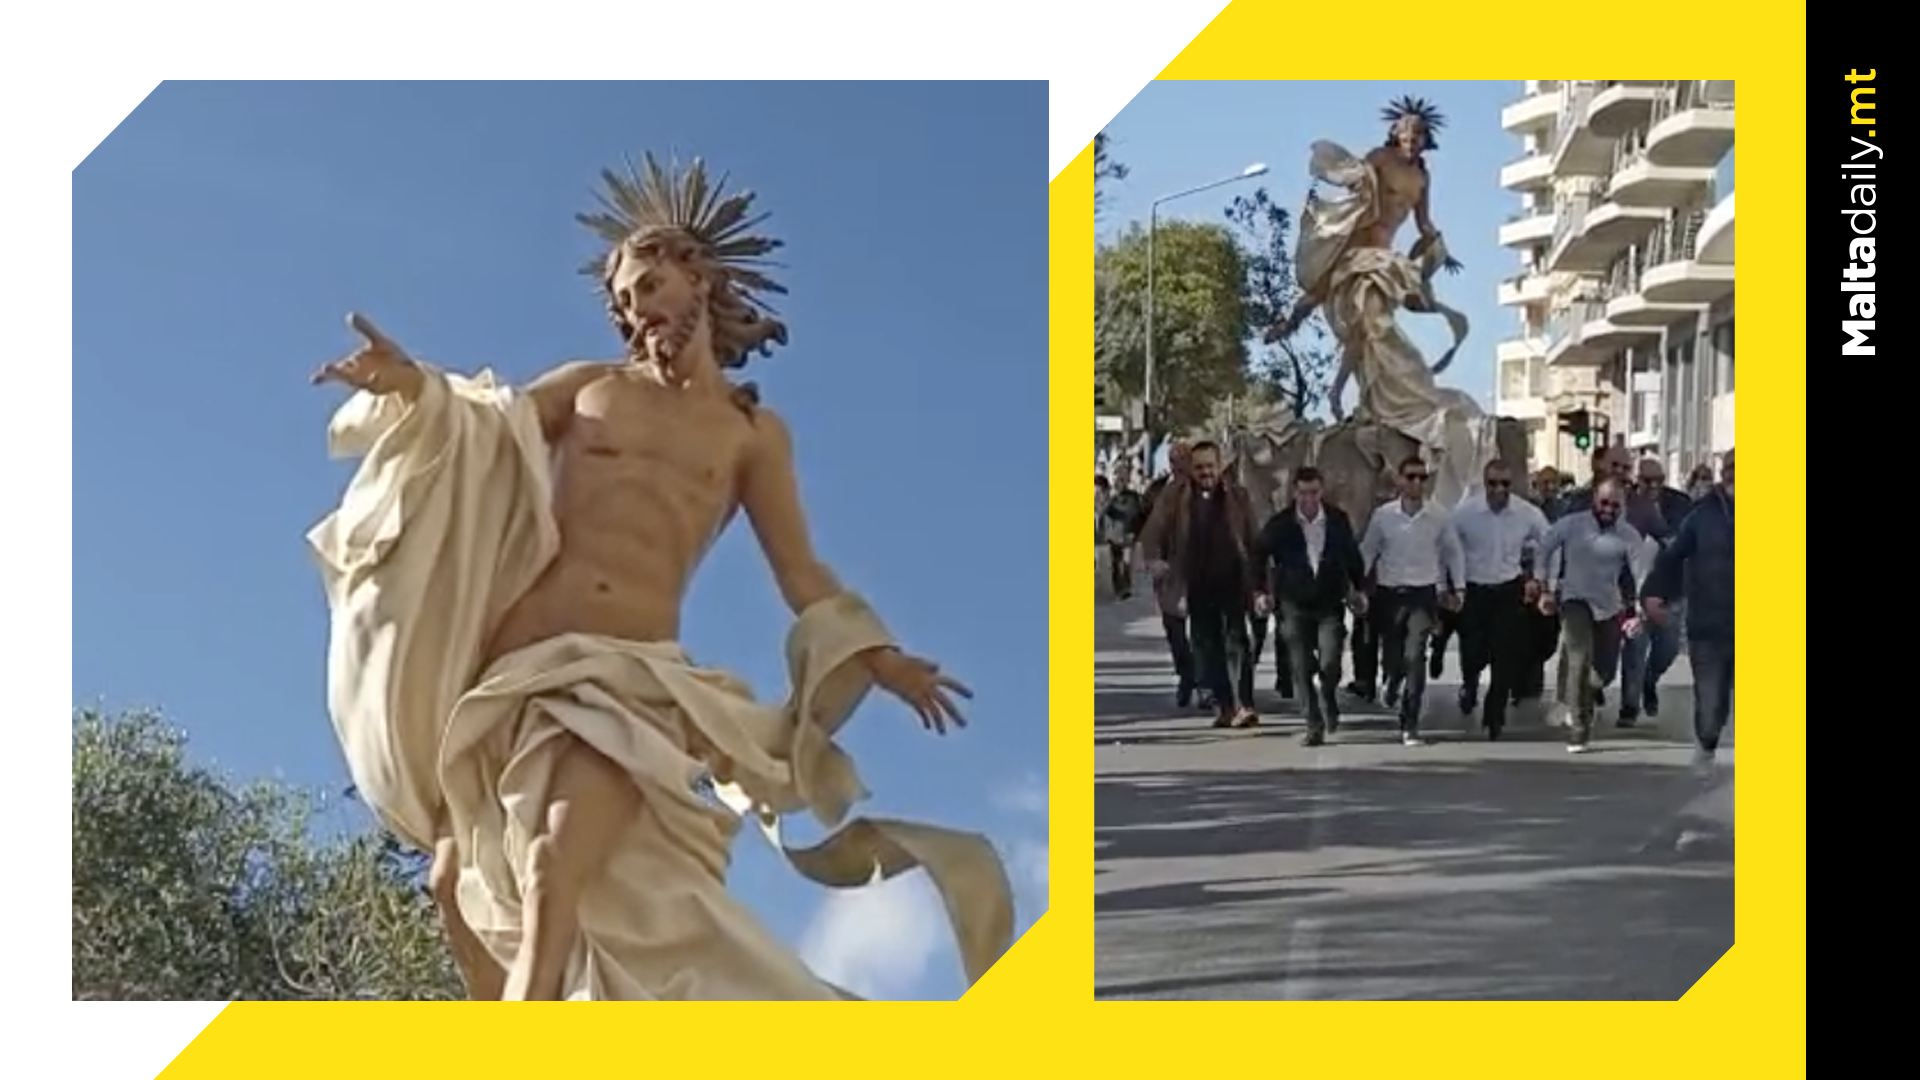 Enthusiasts run with Risen Christ statue in Sliema in Easter Celebrations